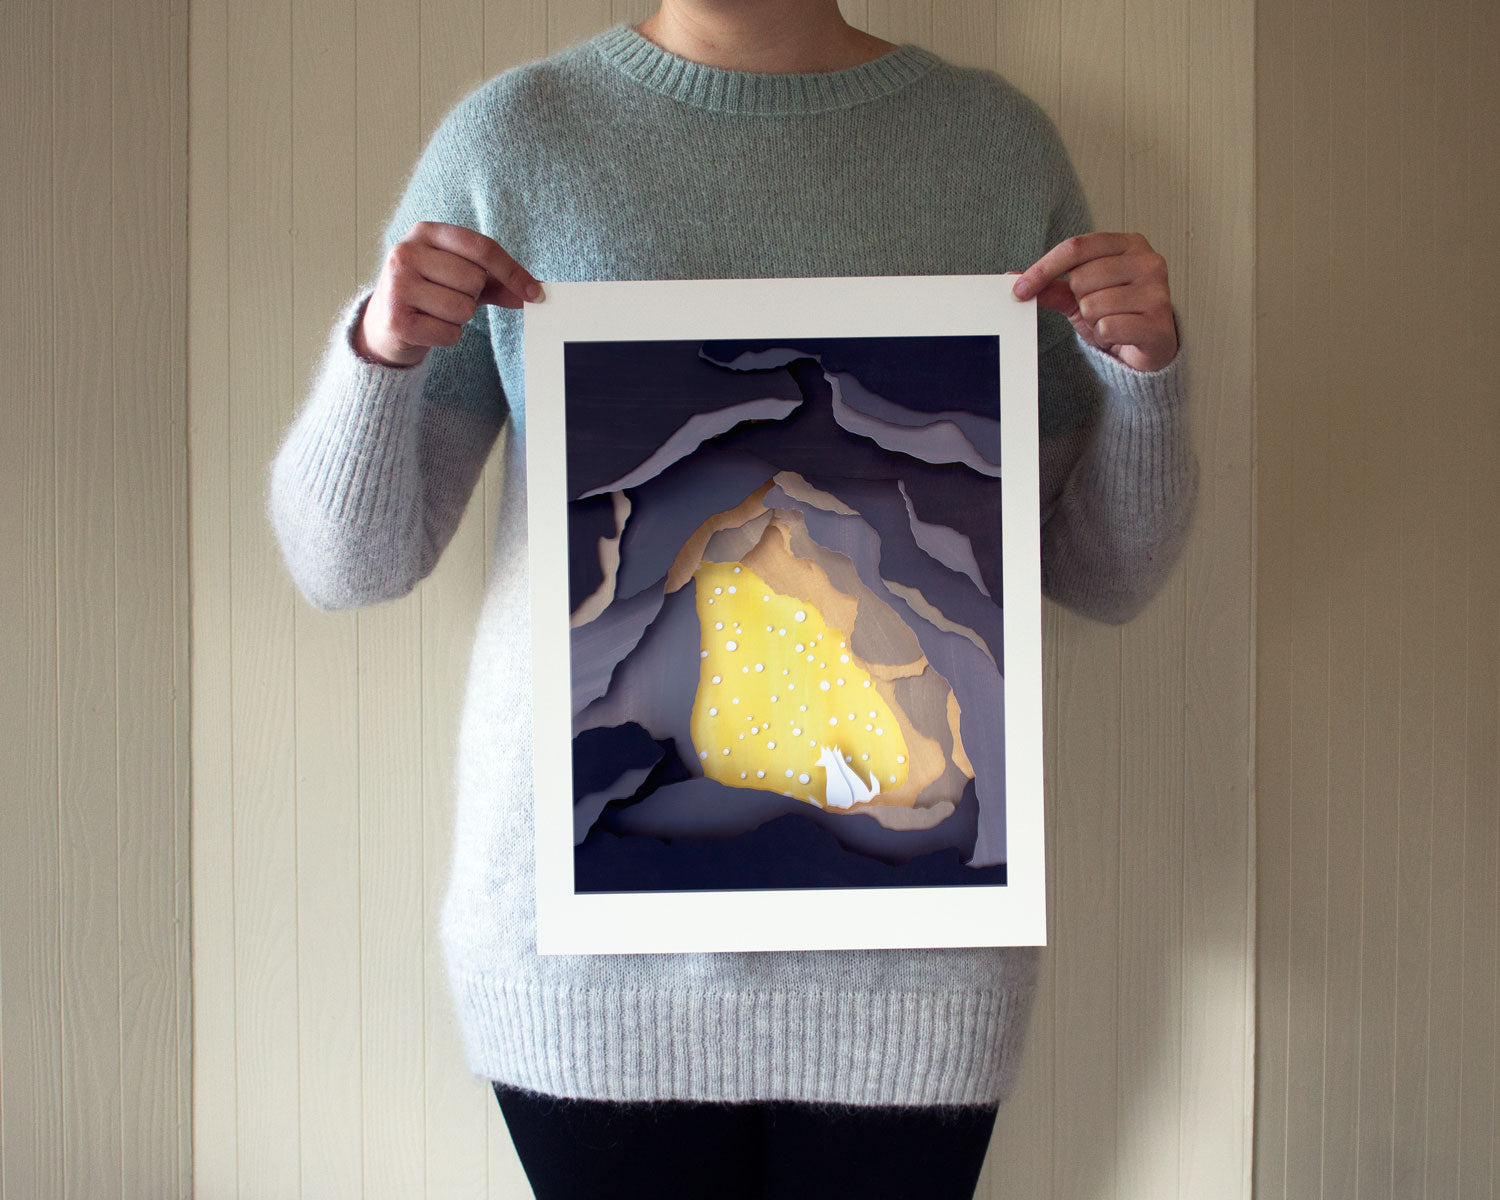 Archival print of cut paper illustration of cute scene with two foxes cuddling in a backlit snowy cave.